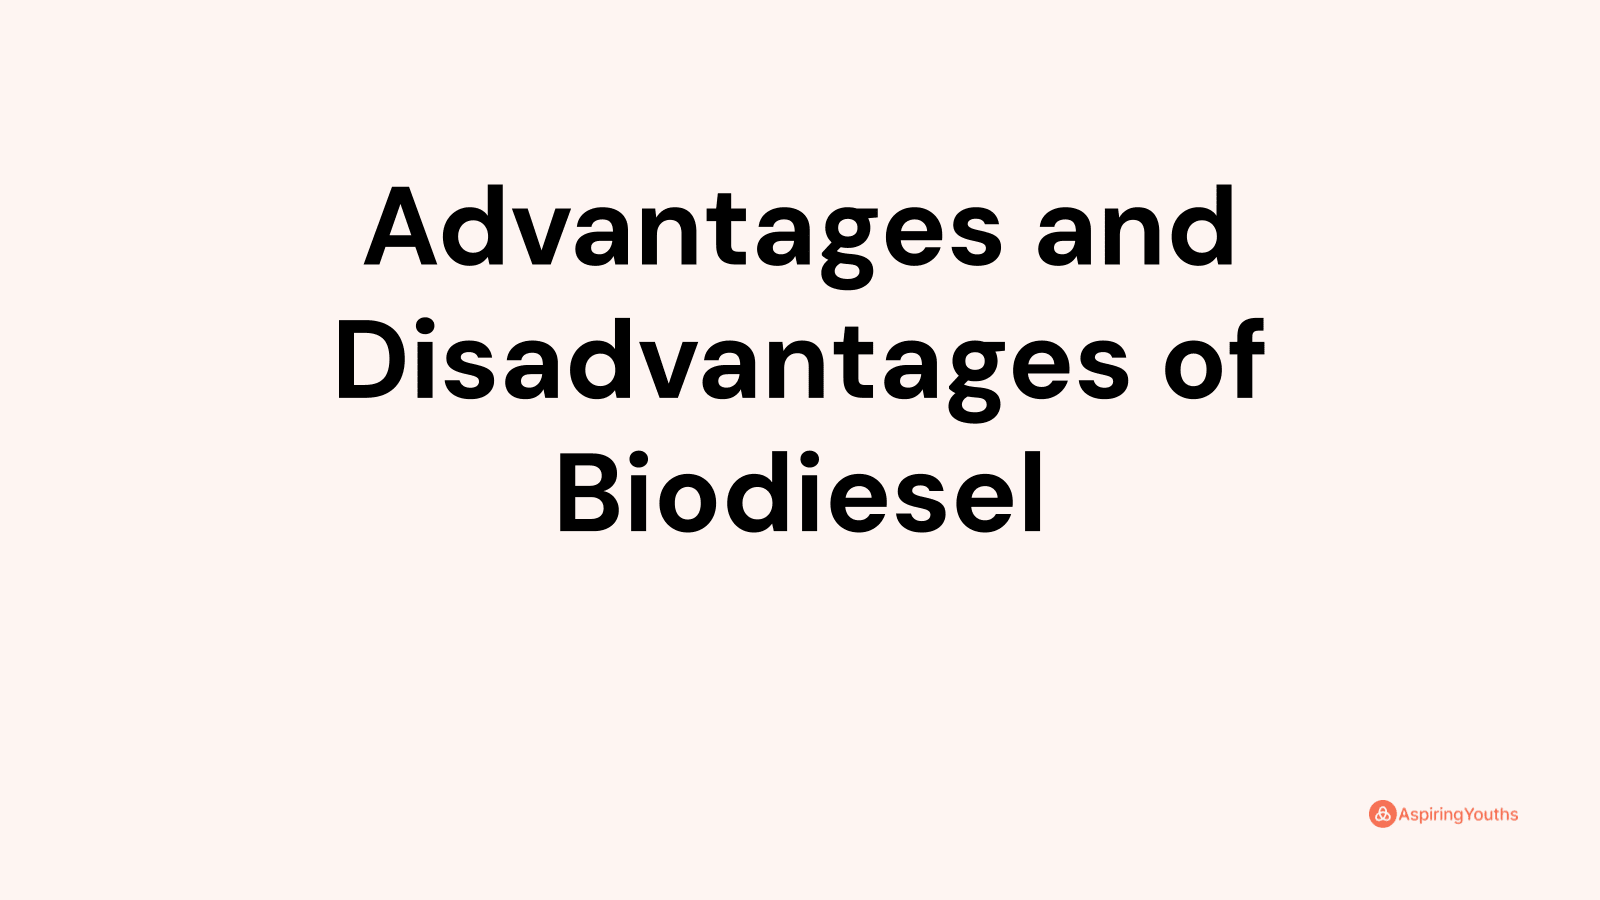 Advantages and disadvantages of Biodiesel